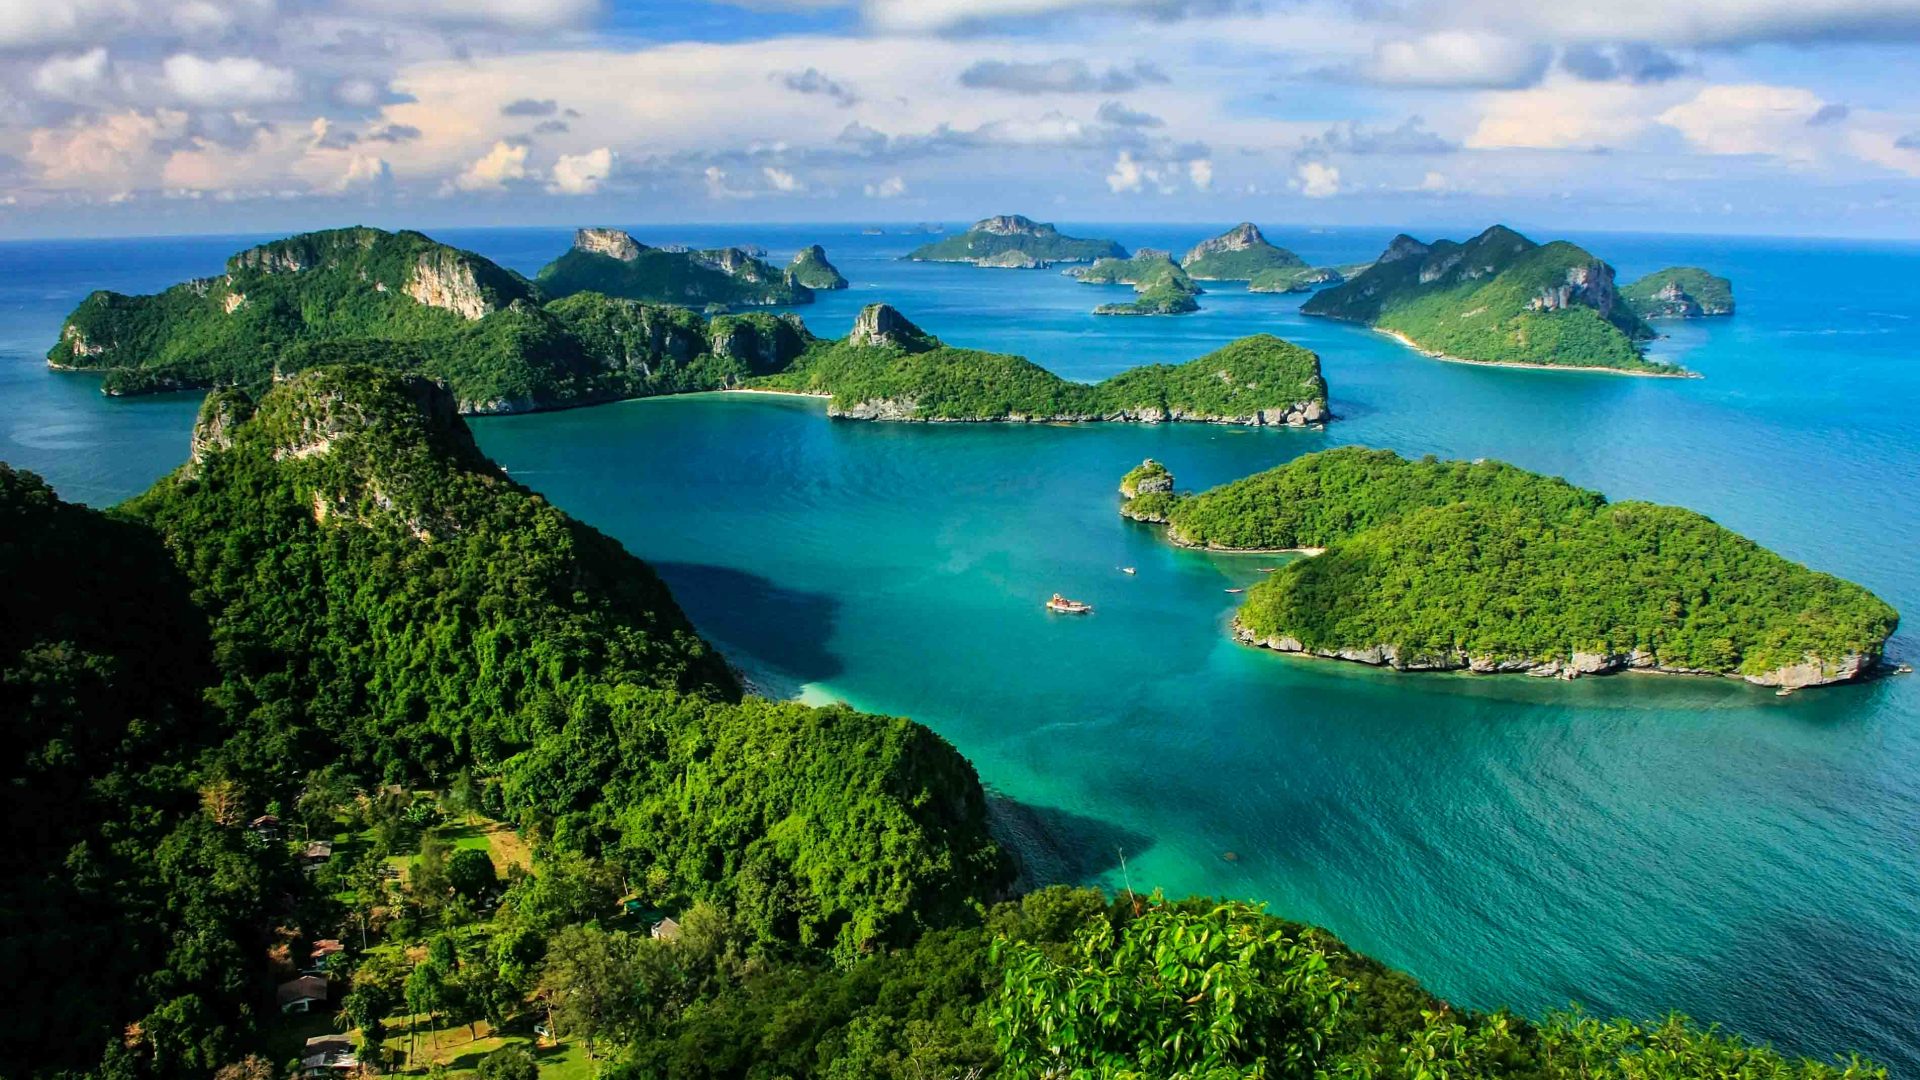 Thailand’s lesser-known islands: A definitive guide